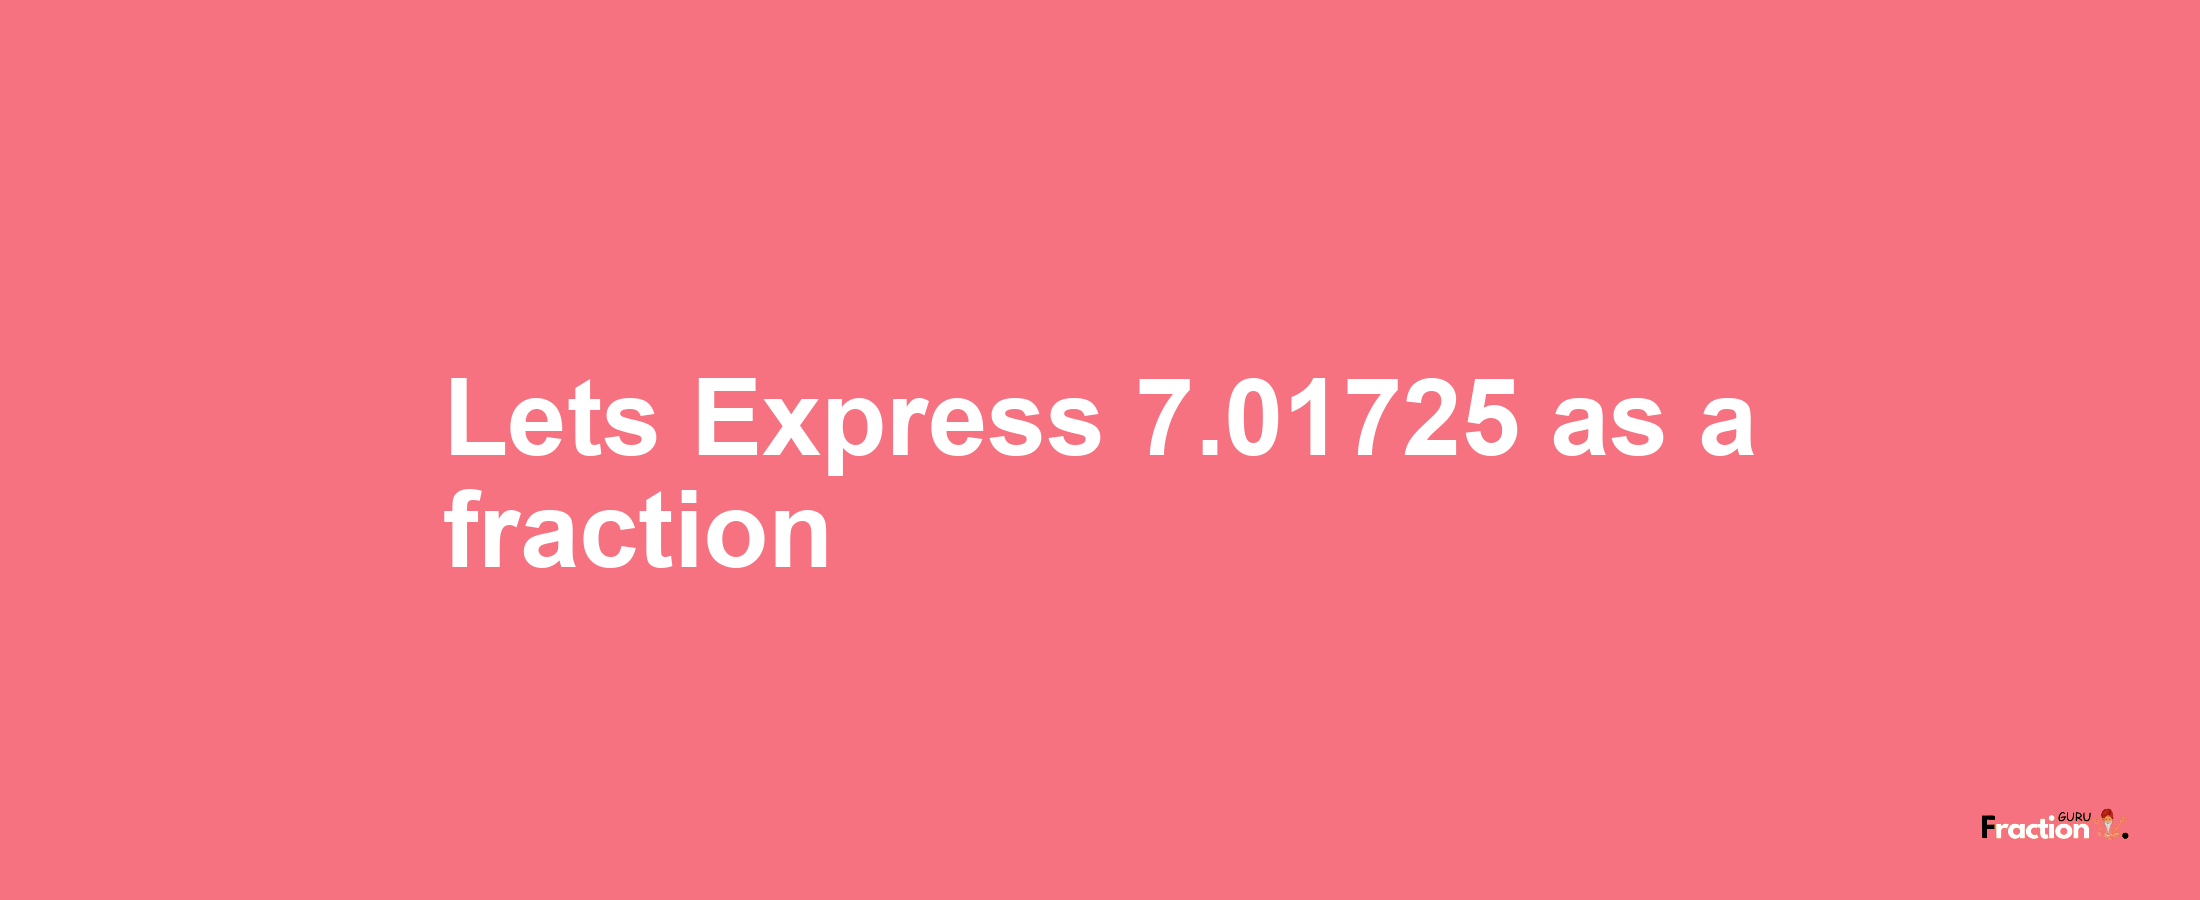 Lets Express 7.01725 as afraction